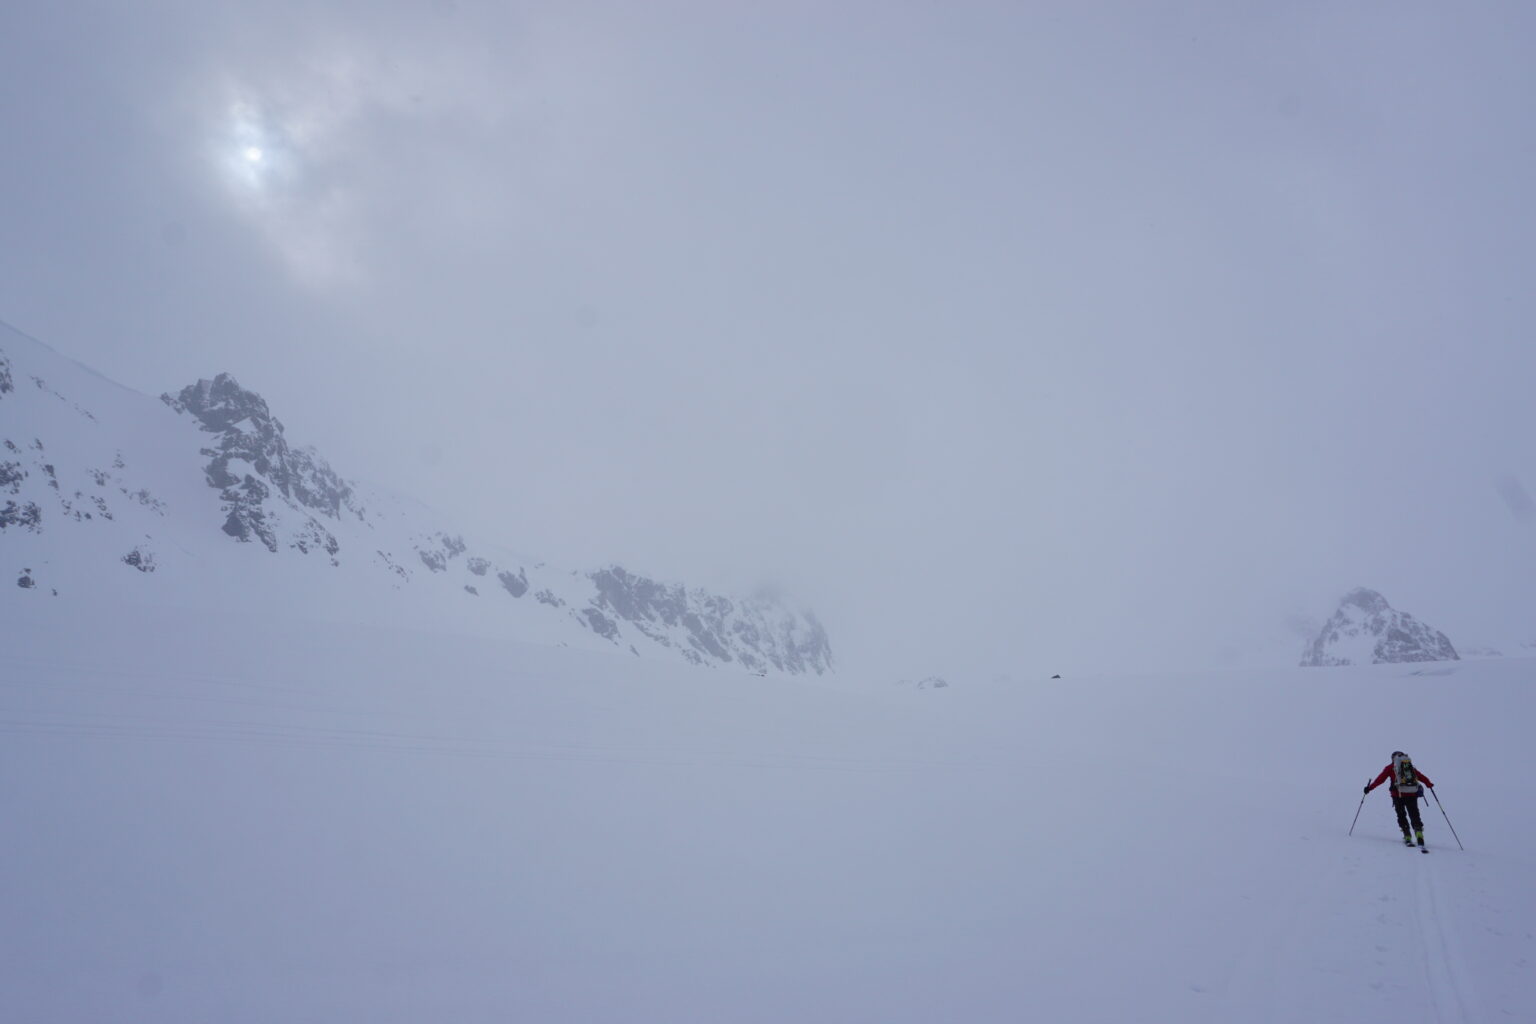 Hiking up the Strupbeen Glacier in a whiteout